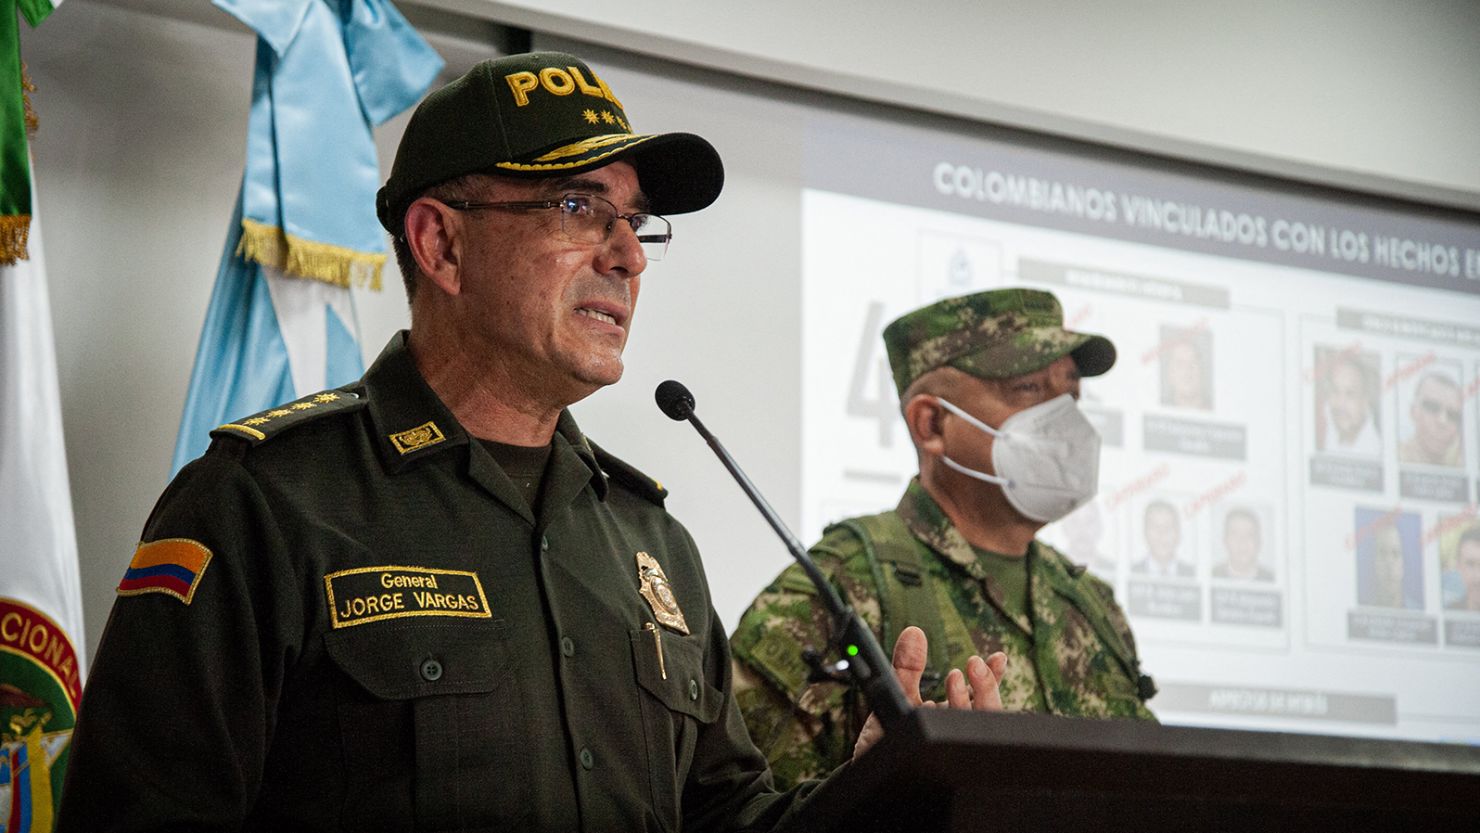 Colombian National Police Chief General Jorge Vargas, left, and Army General Luis Fernando Navarro give a news conference in Bogota, Colombia on July 9 regarding the assassination of Haiti's President.